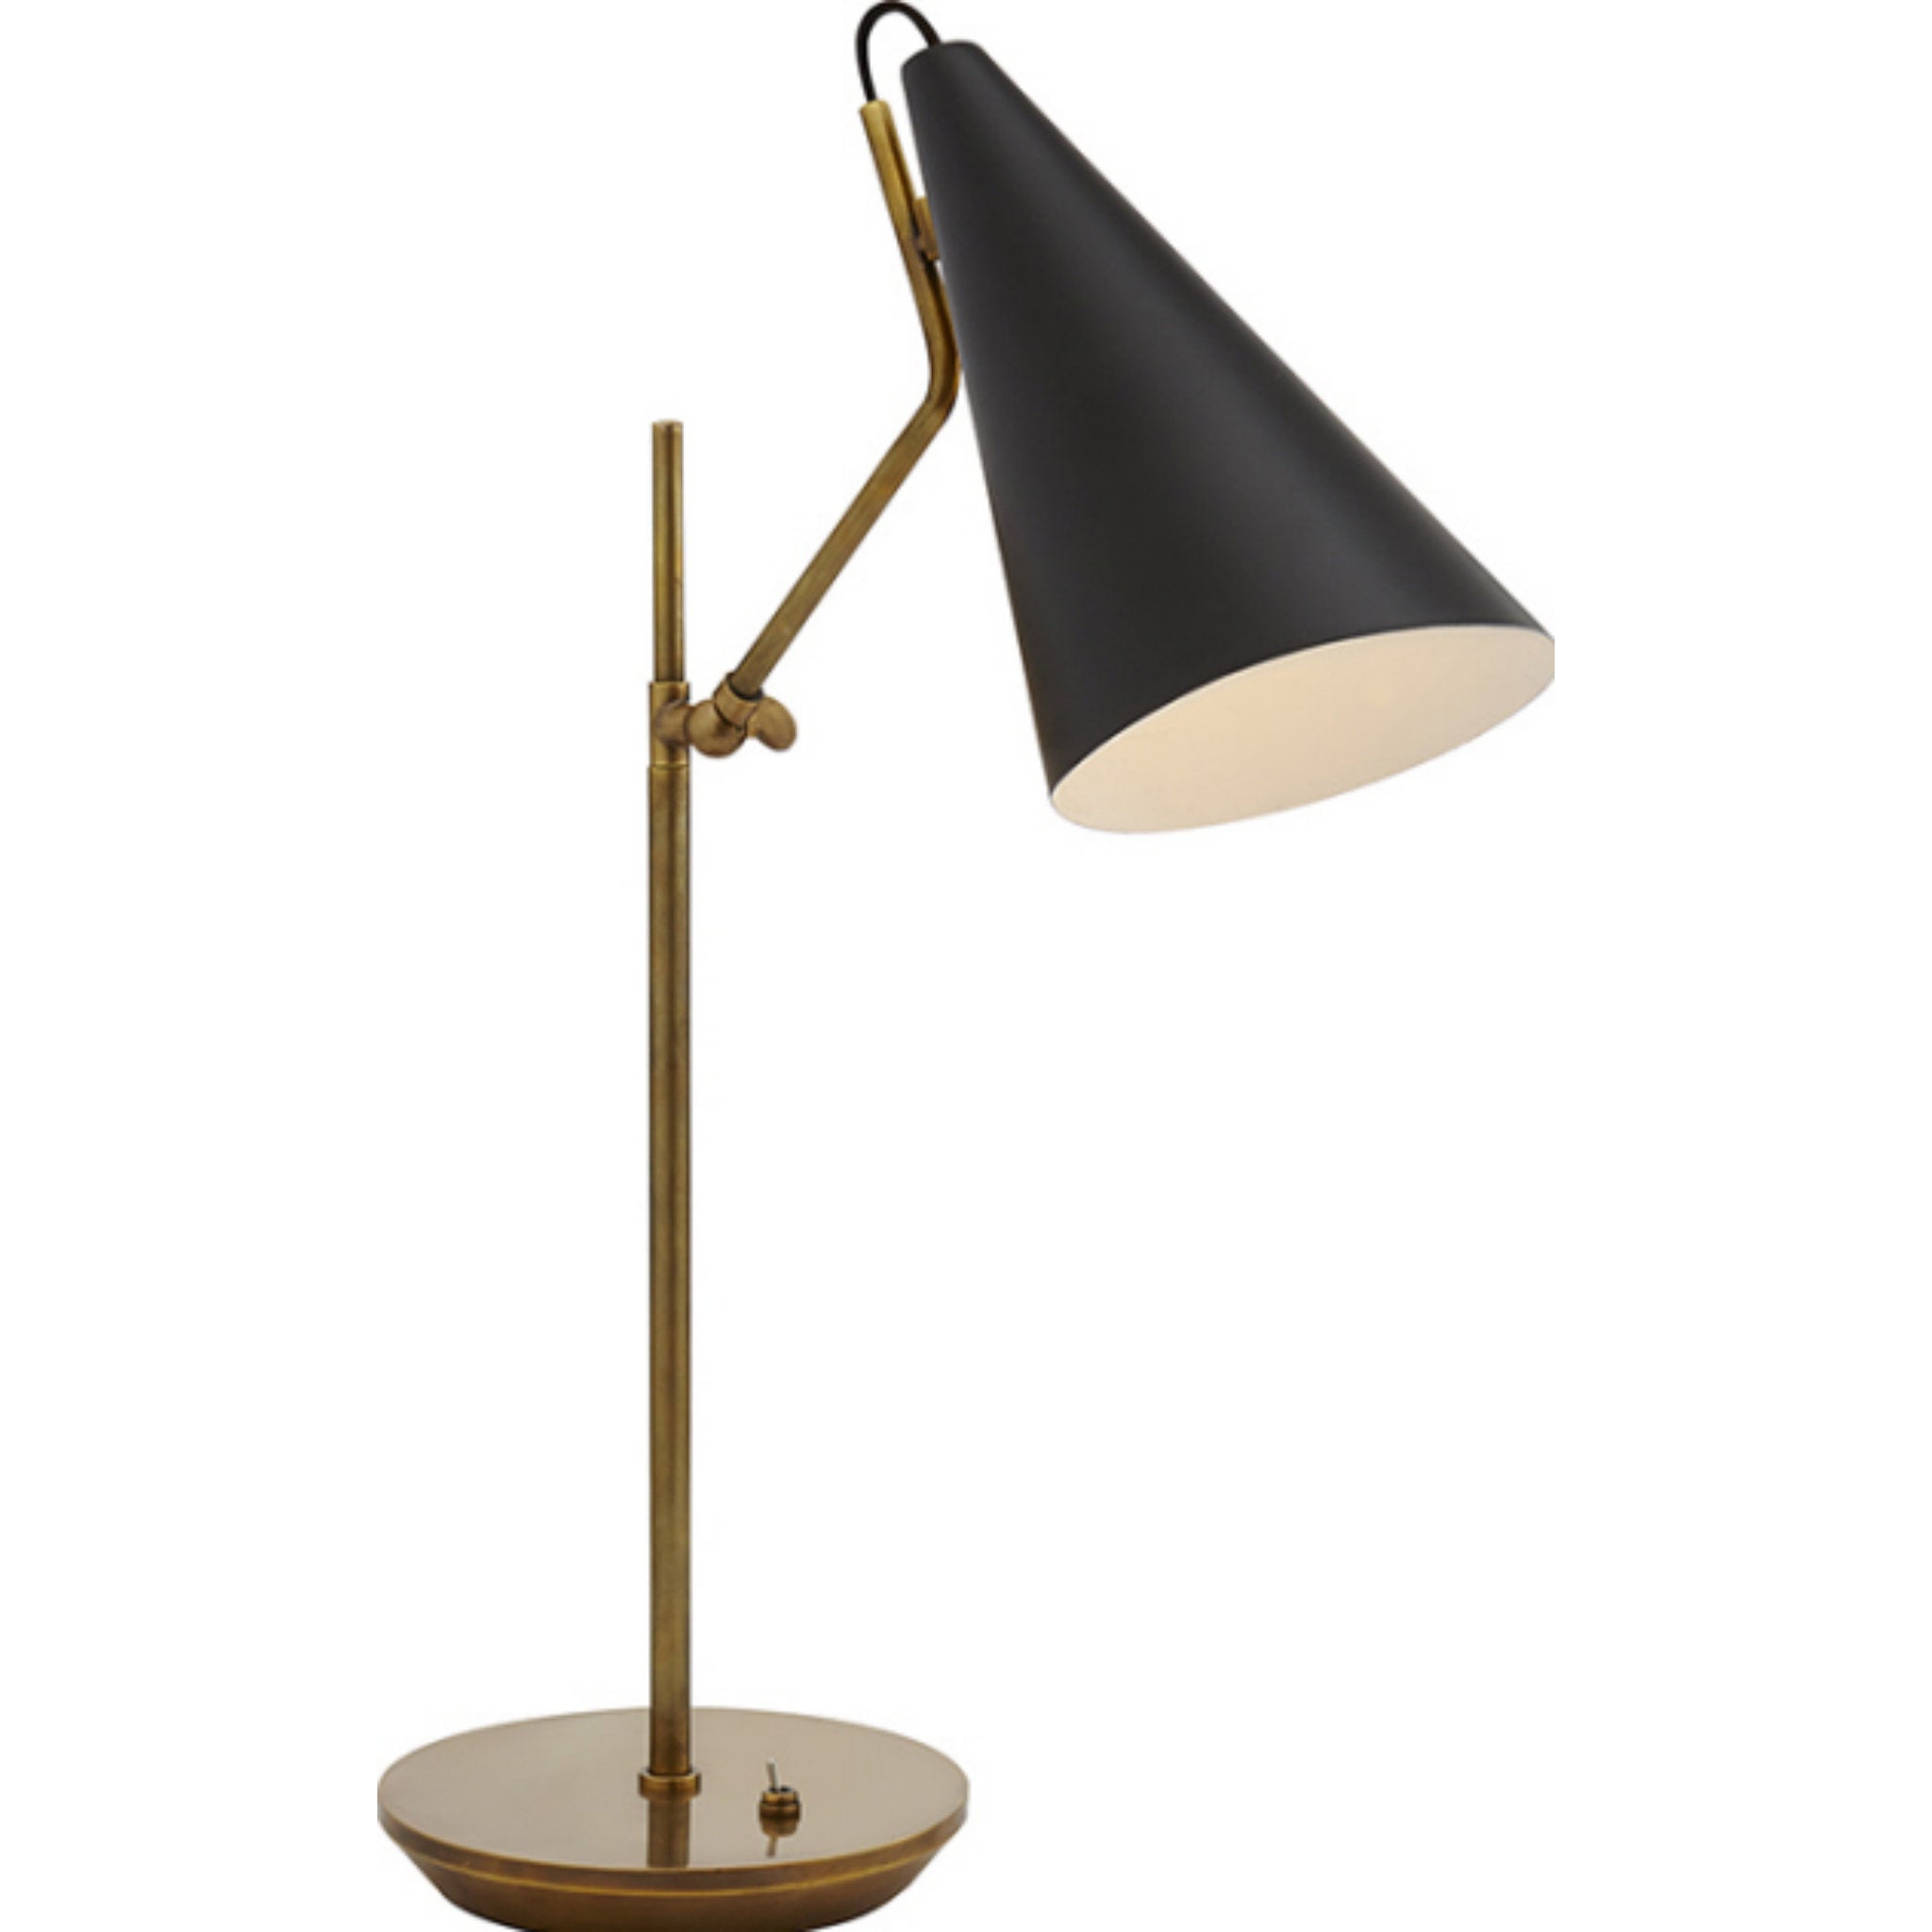 AERIN Clemente Table Lamp in Hand-Rubbed Antique Brass with Black